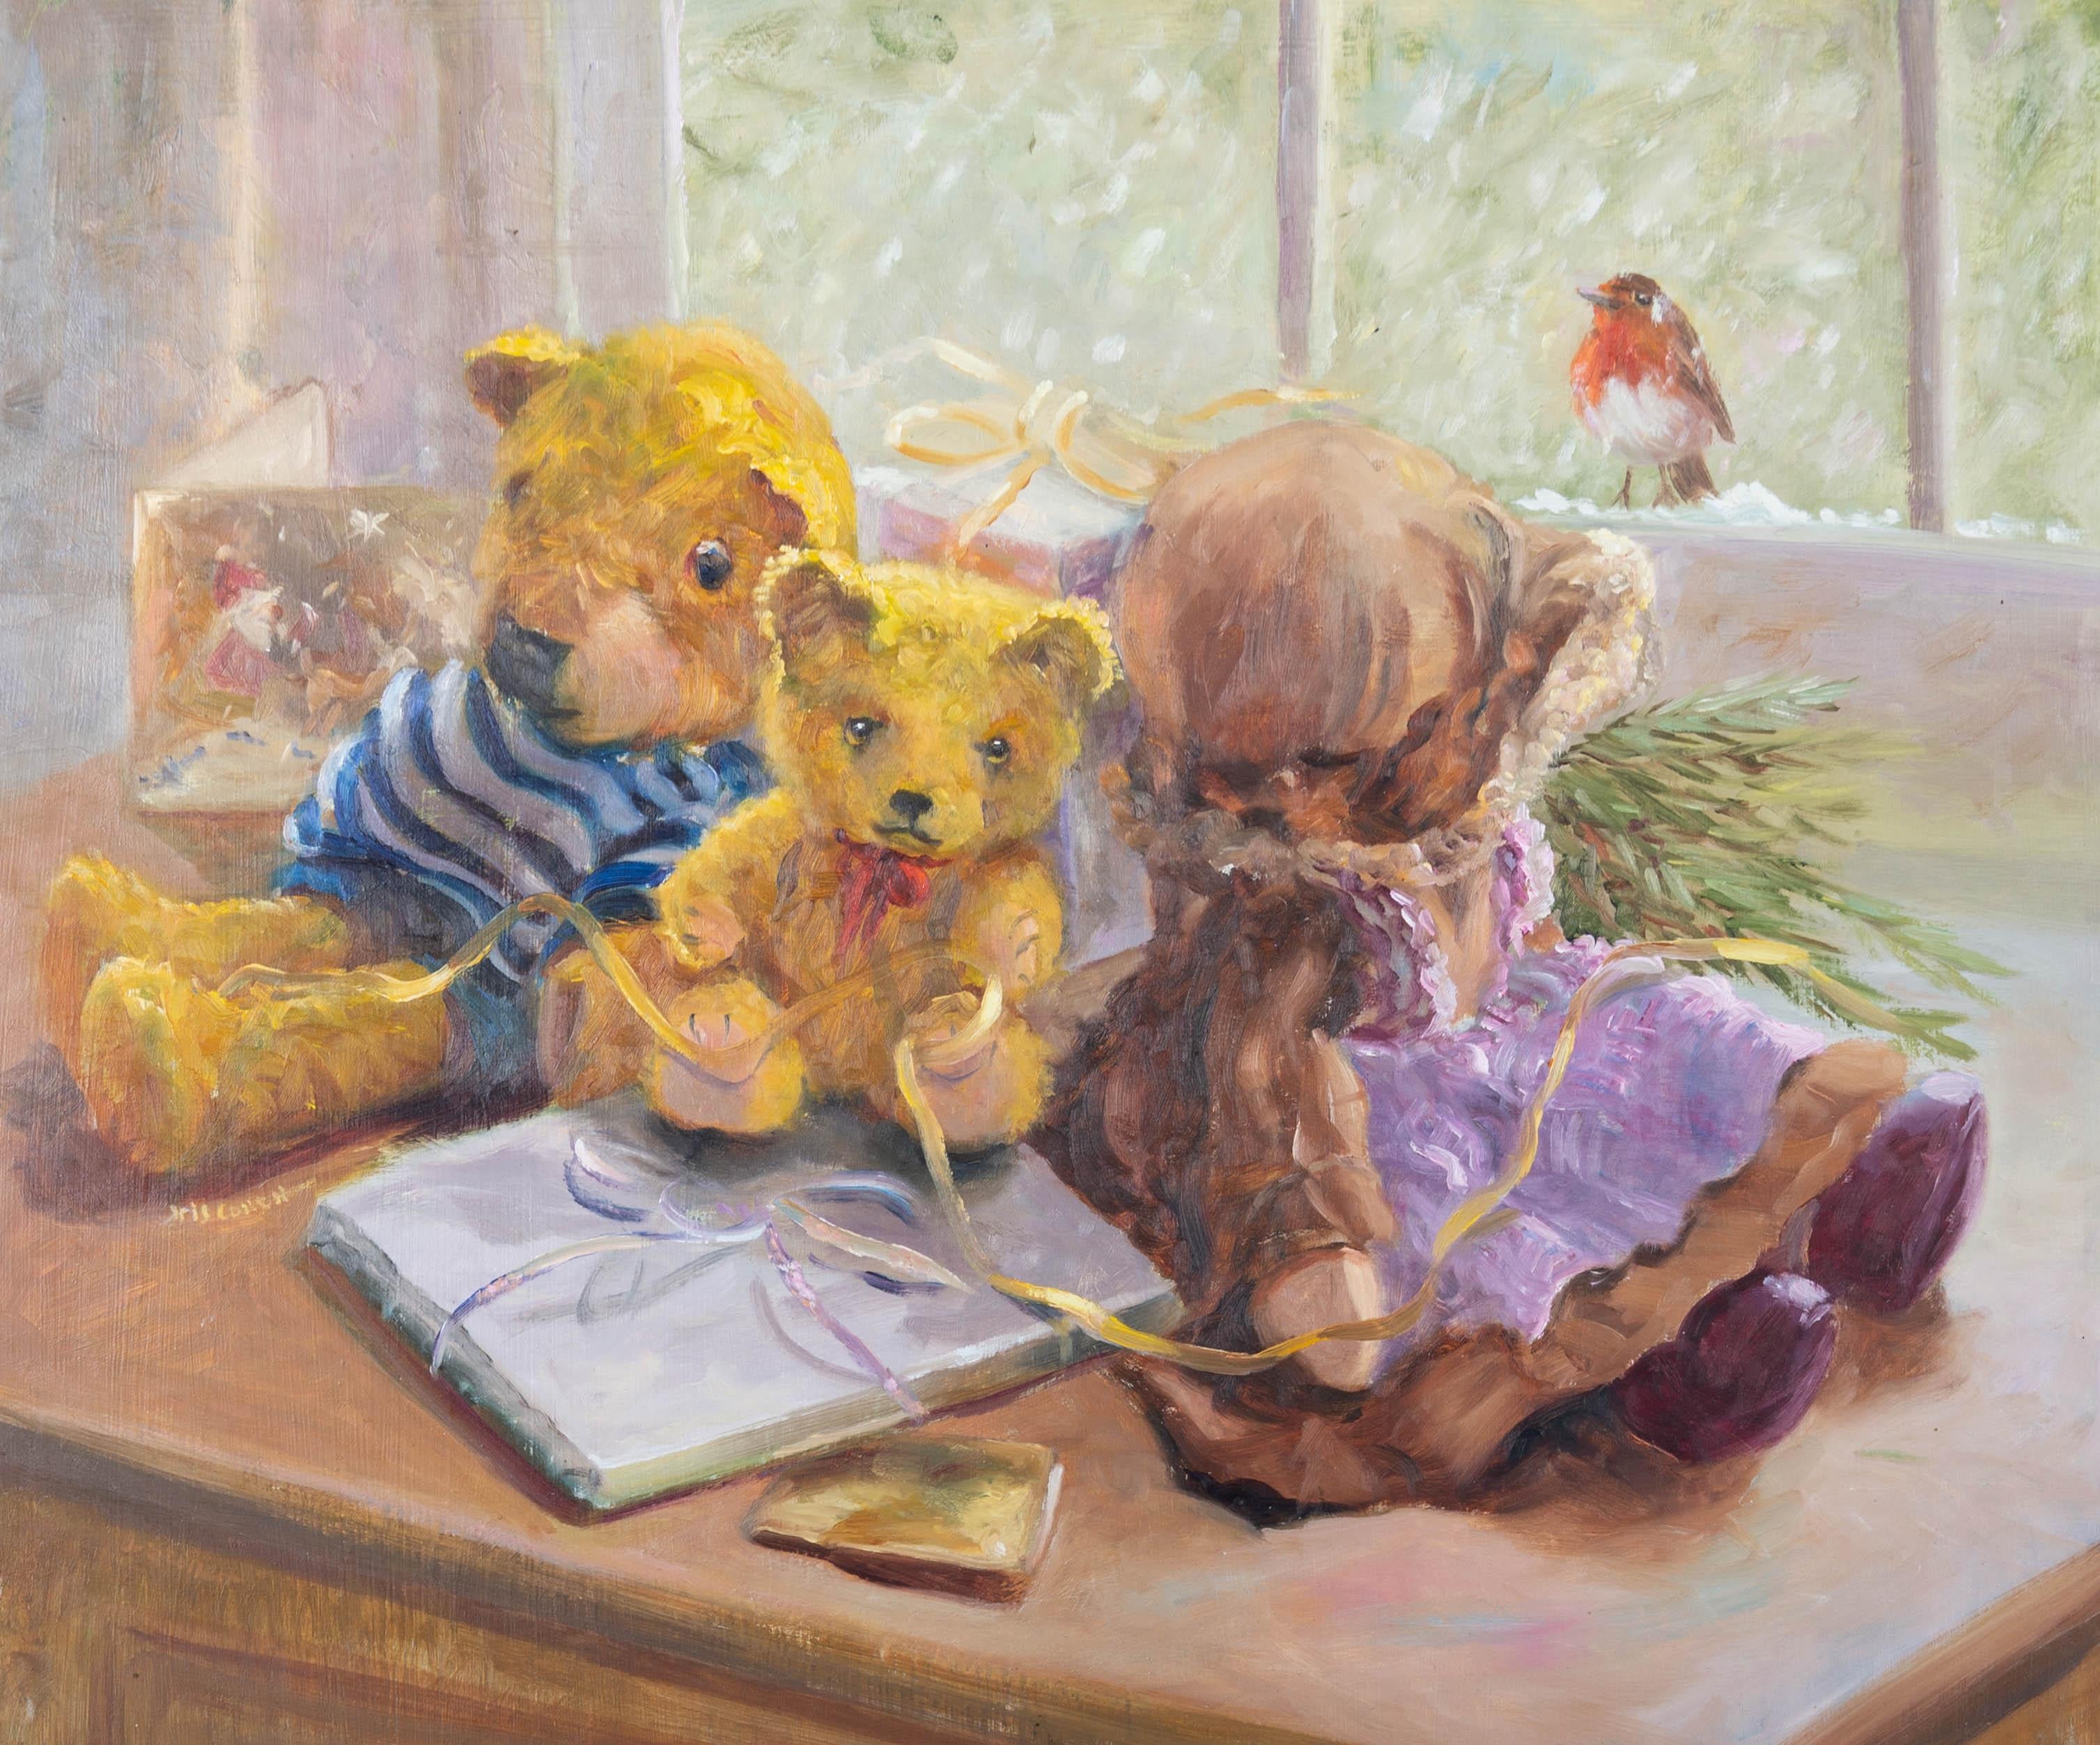 A charming study of teddy bears and a doll by well-listed artist Iris Collett. At the window a robin sits in the snow looking into the house at the toys surrounding a small present. Painted in expressive brush strokes the artist has captured the